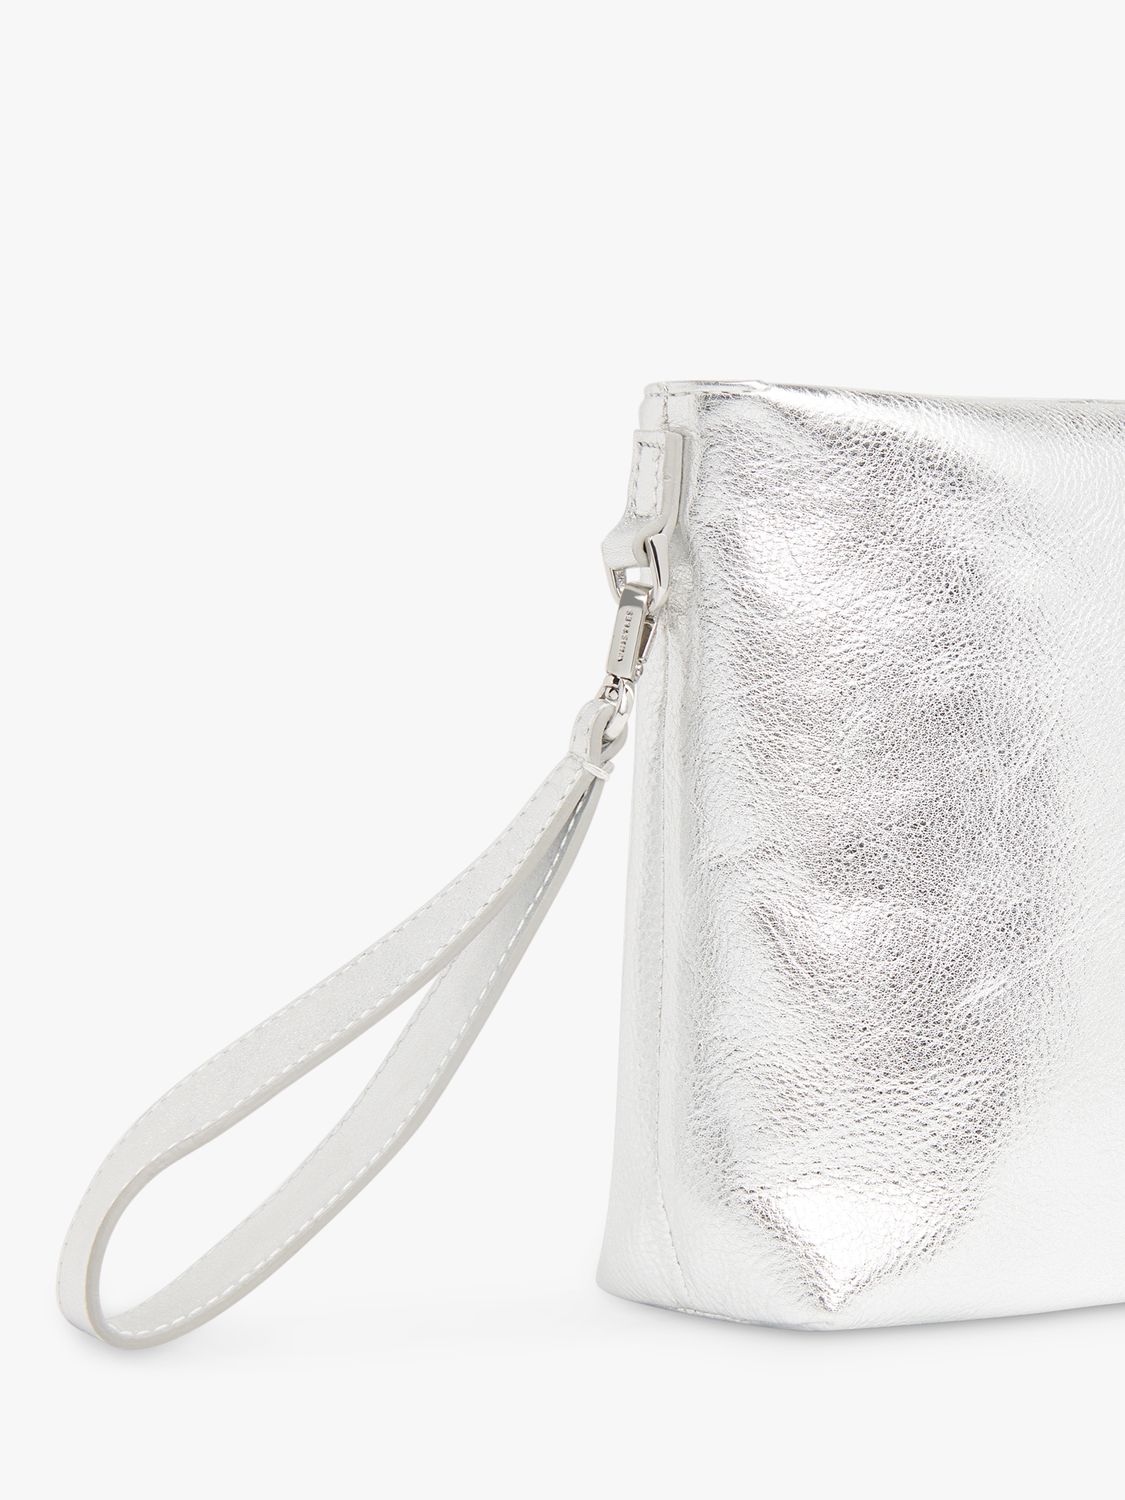 Whistles Avah Leather Zip Clutch Bag, Silver